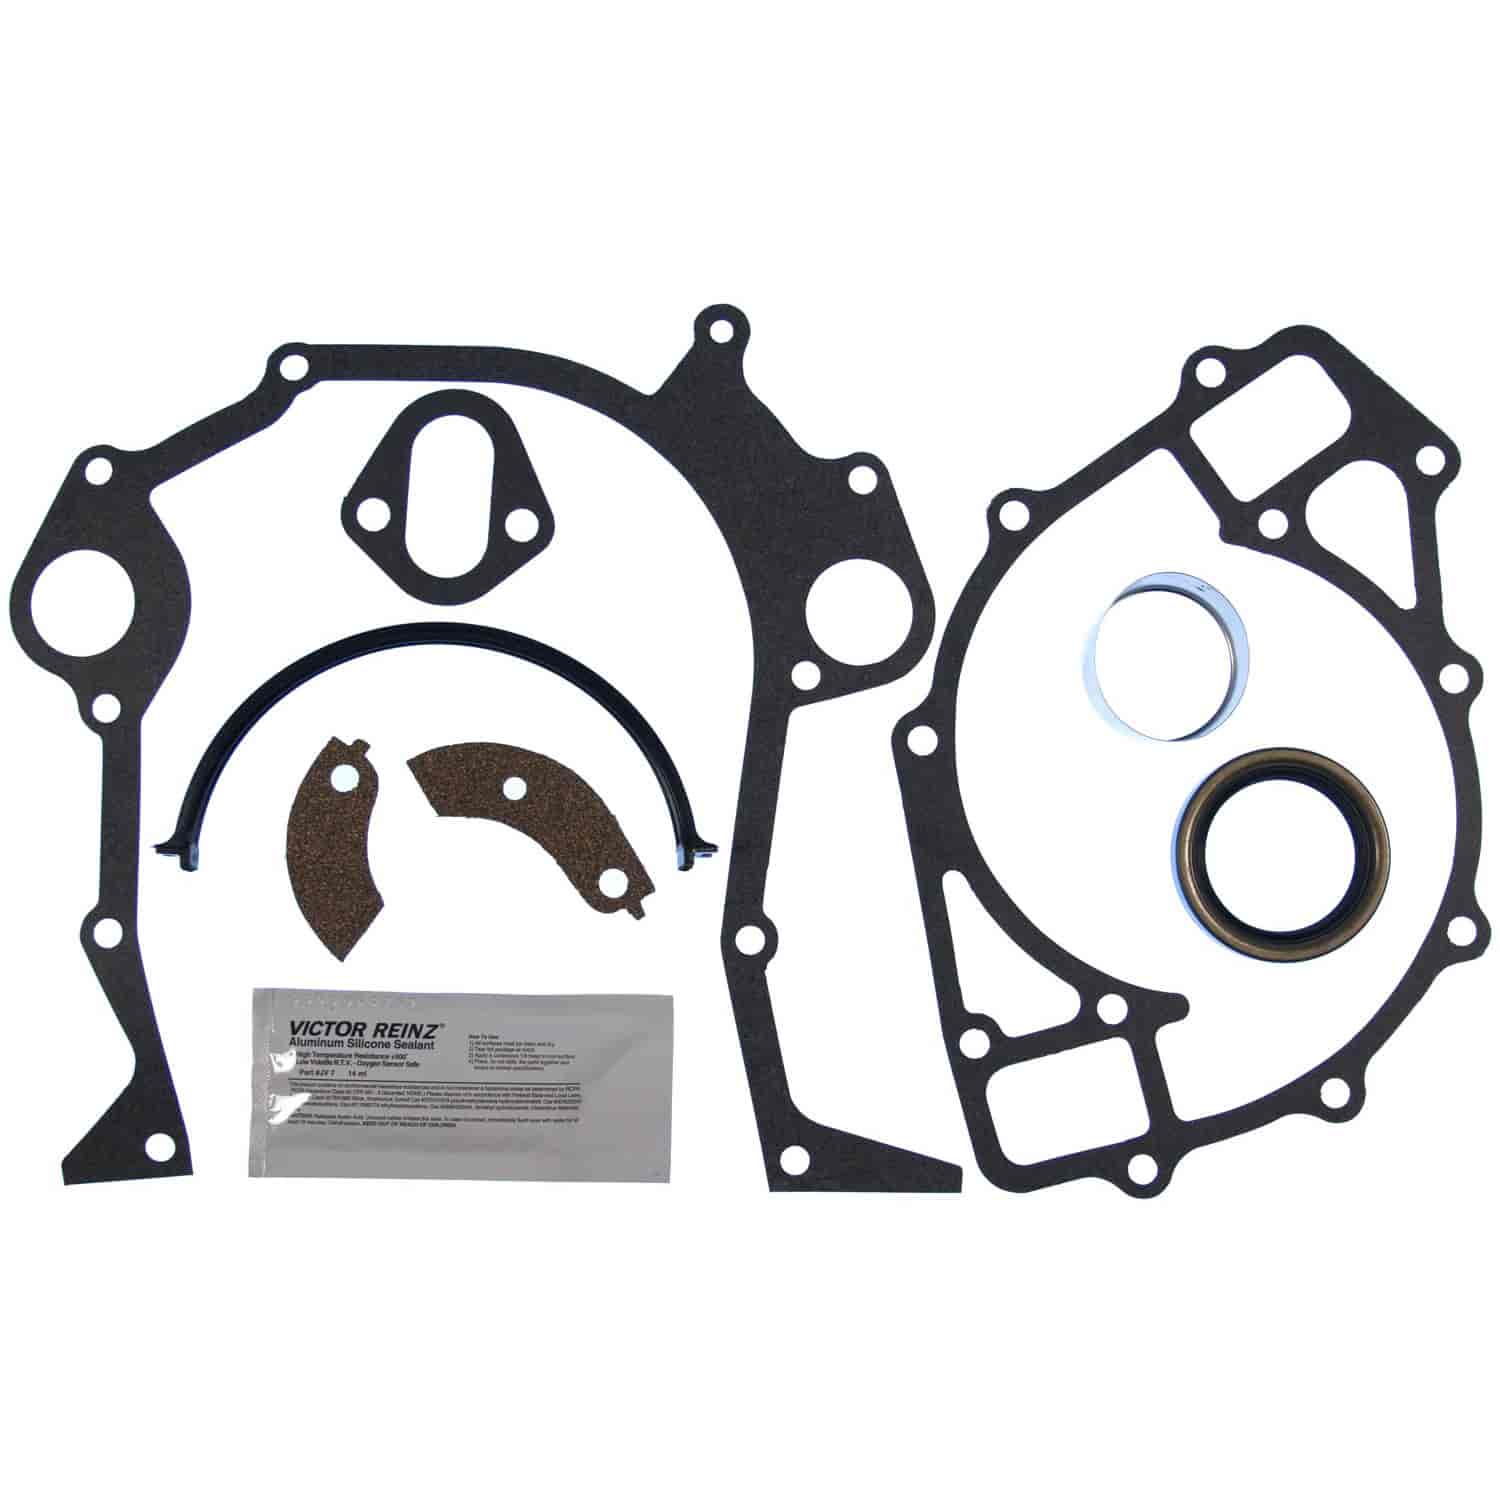 Timing Cover Gasket Set 1968-1997 Big Block Ford 429/460ci